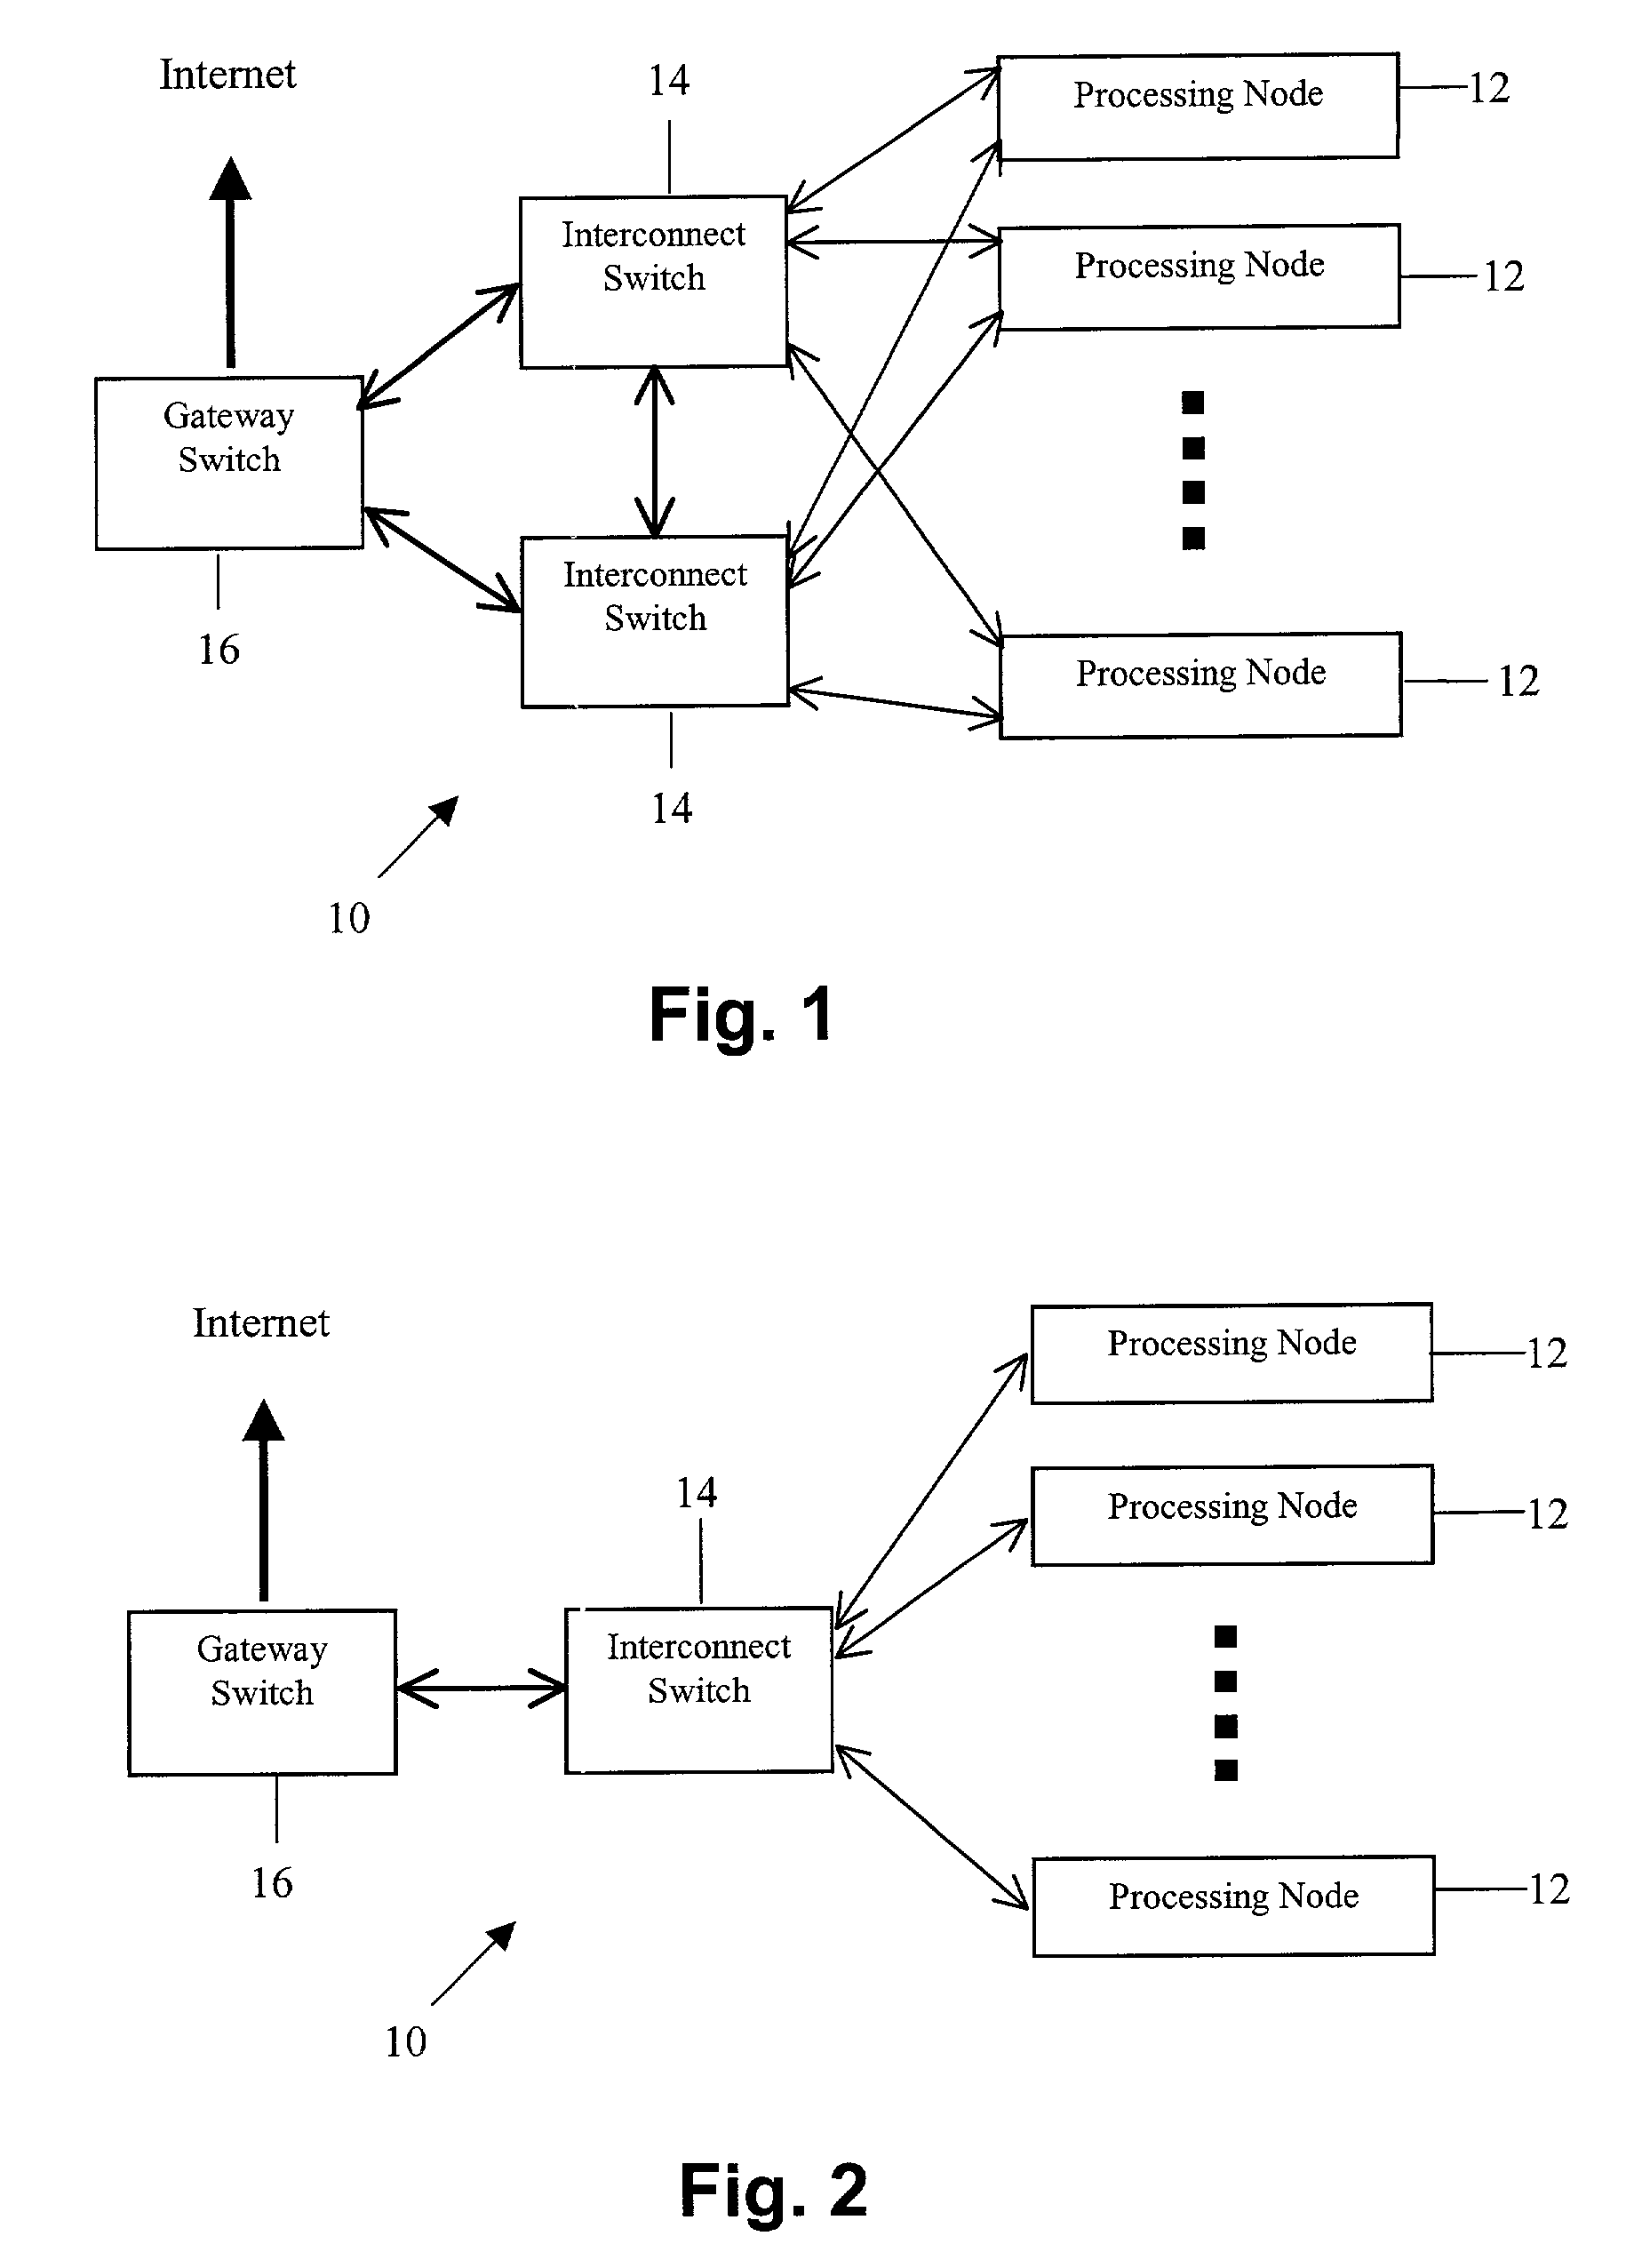 Method and system for communication control in a computing environment